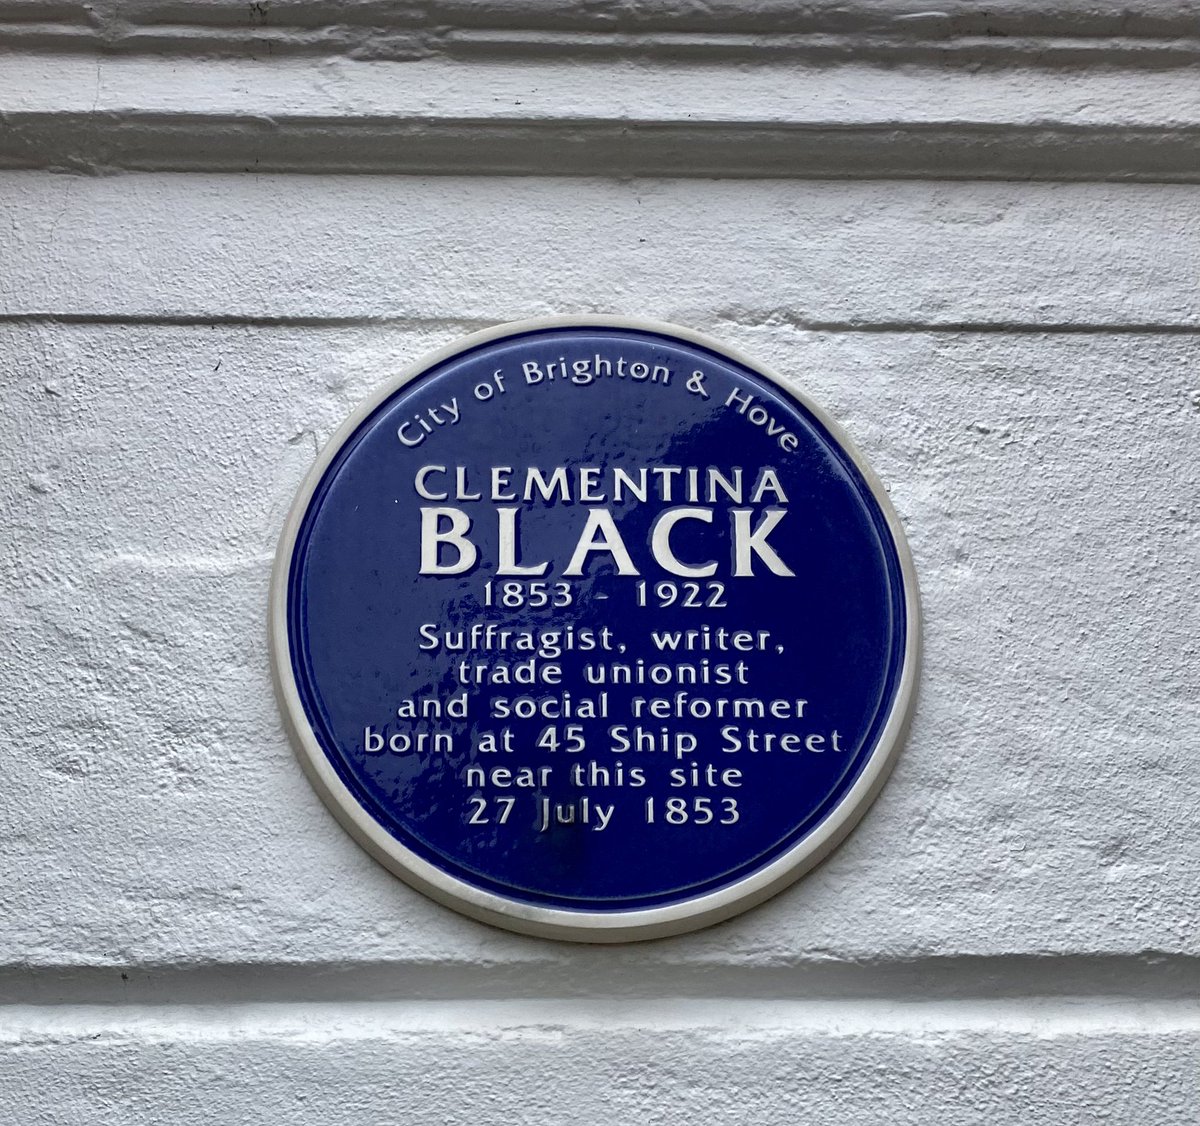 #blueplaque hunting in Brighton, and here’s Clementina Black, #suffragette and #writer and all round #badass woman 💪